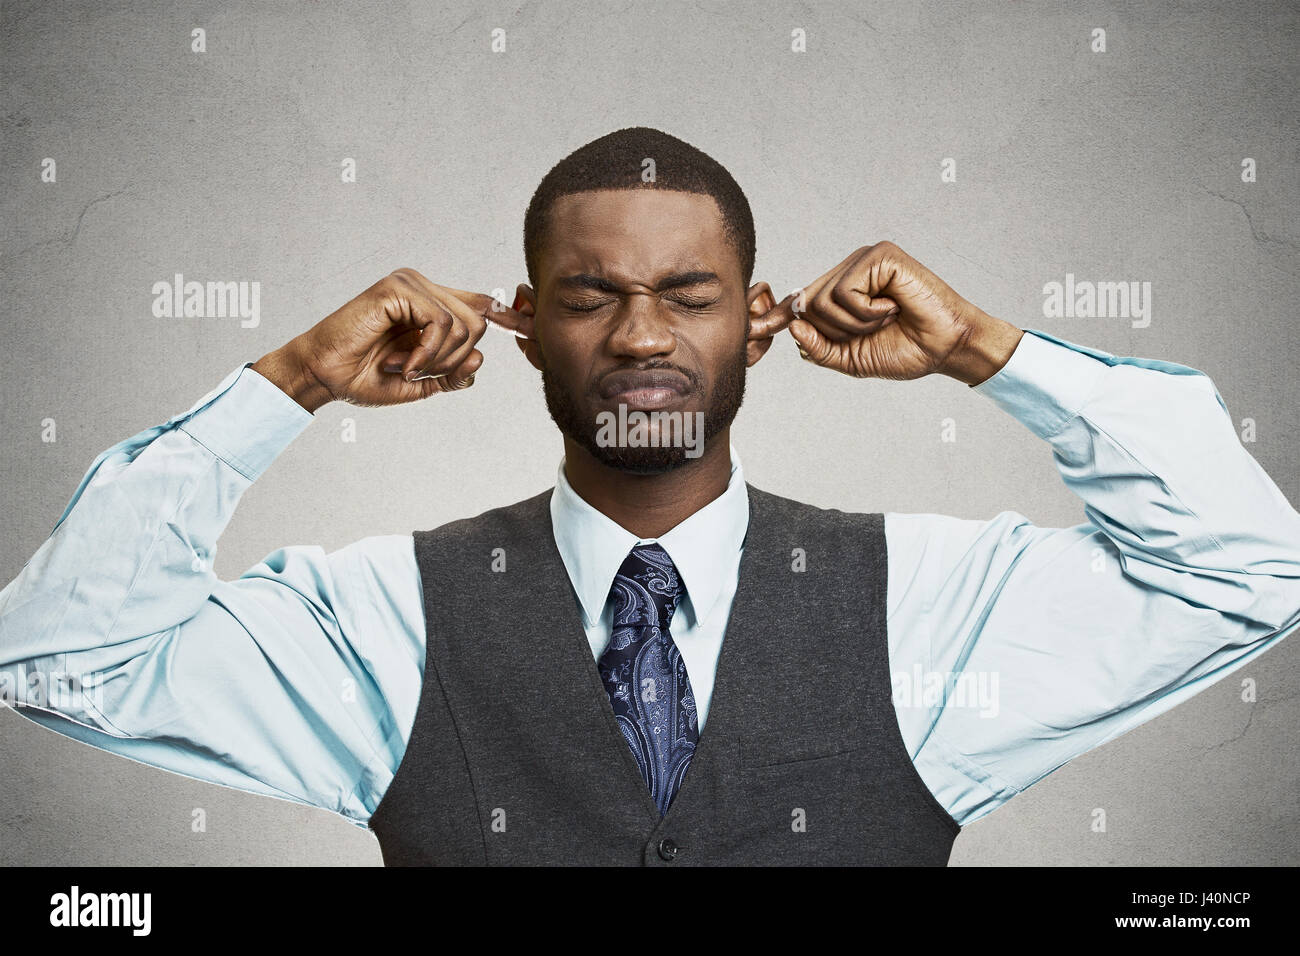 Closeup portrait unhappy, annoyed man plugging closing ears with fingers, disgusted ignoring something not wanting to hear someone side story, isolate Stock Photo